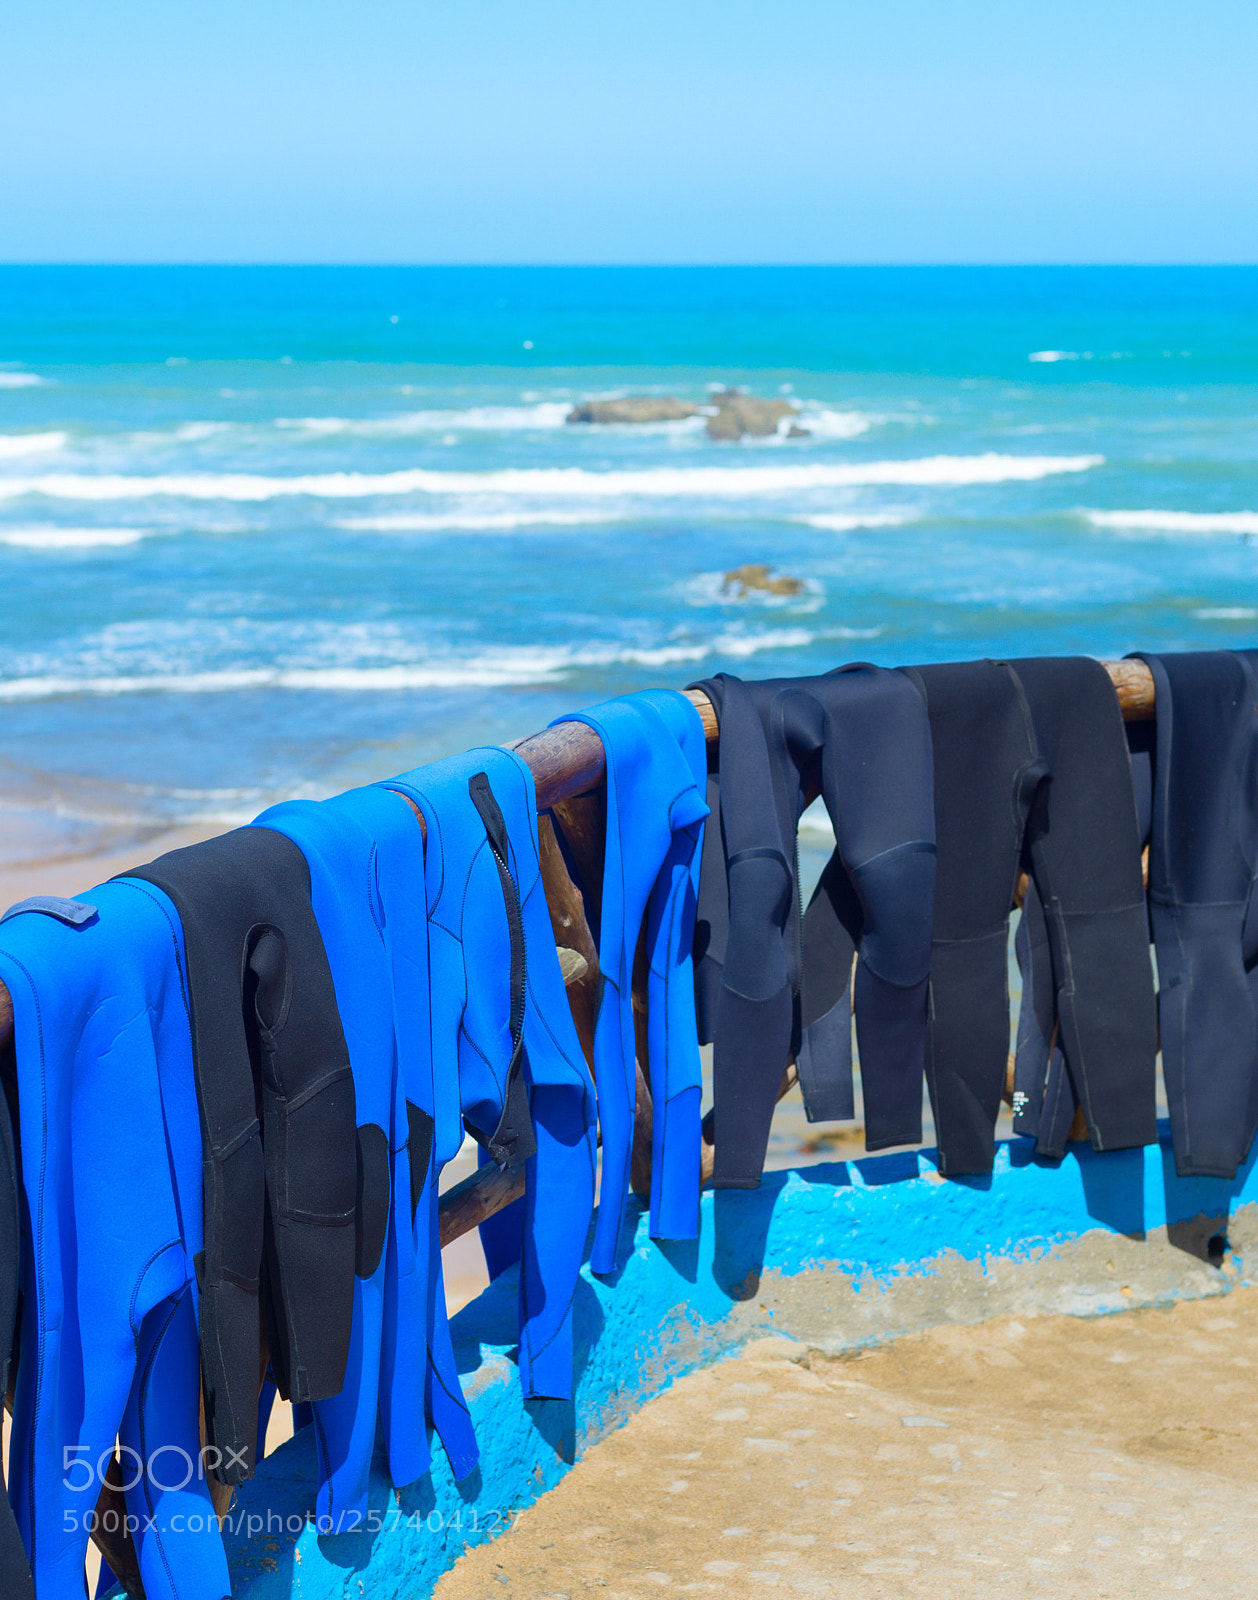 Nikon Df sample photo. Surfing wetsuits drying on photography